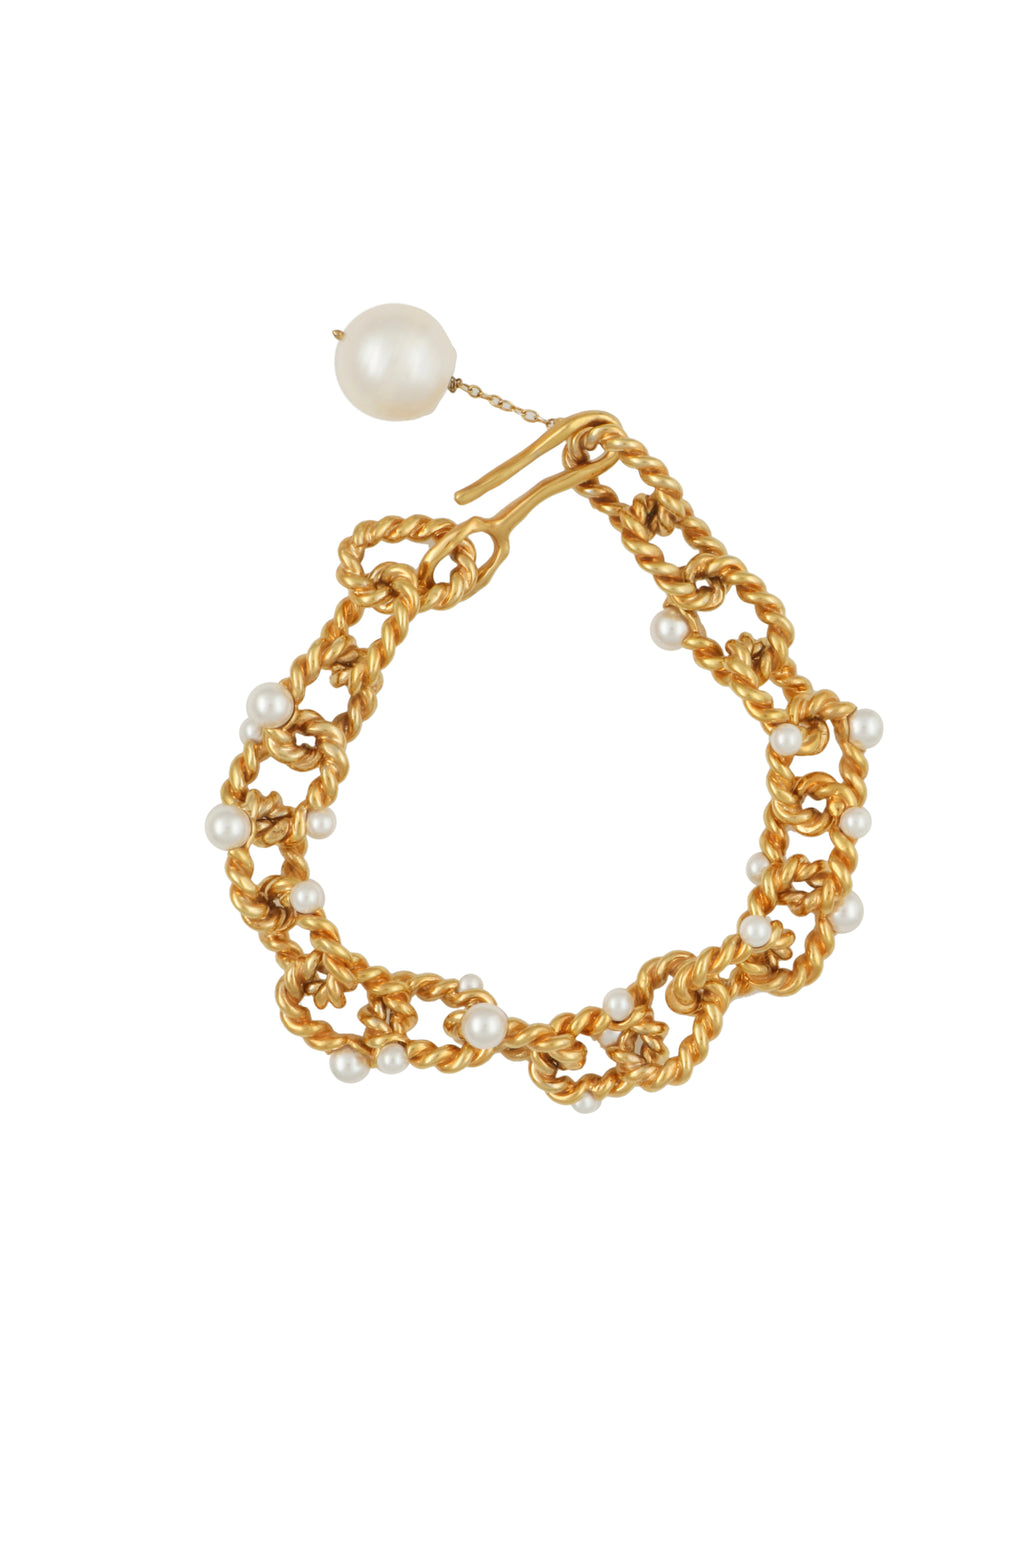 STATEMENT TWISTED LINK BRACELET WITH PEARL